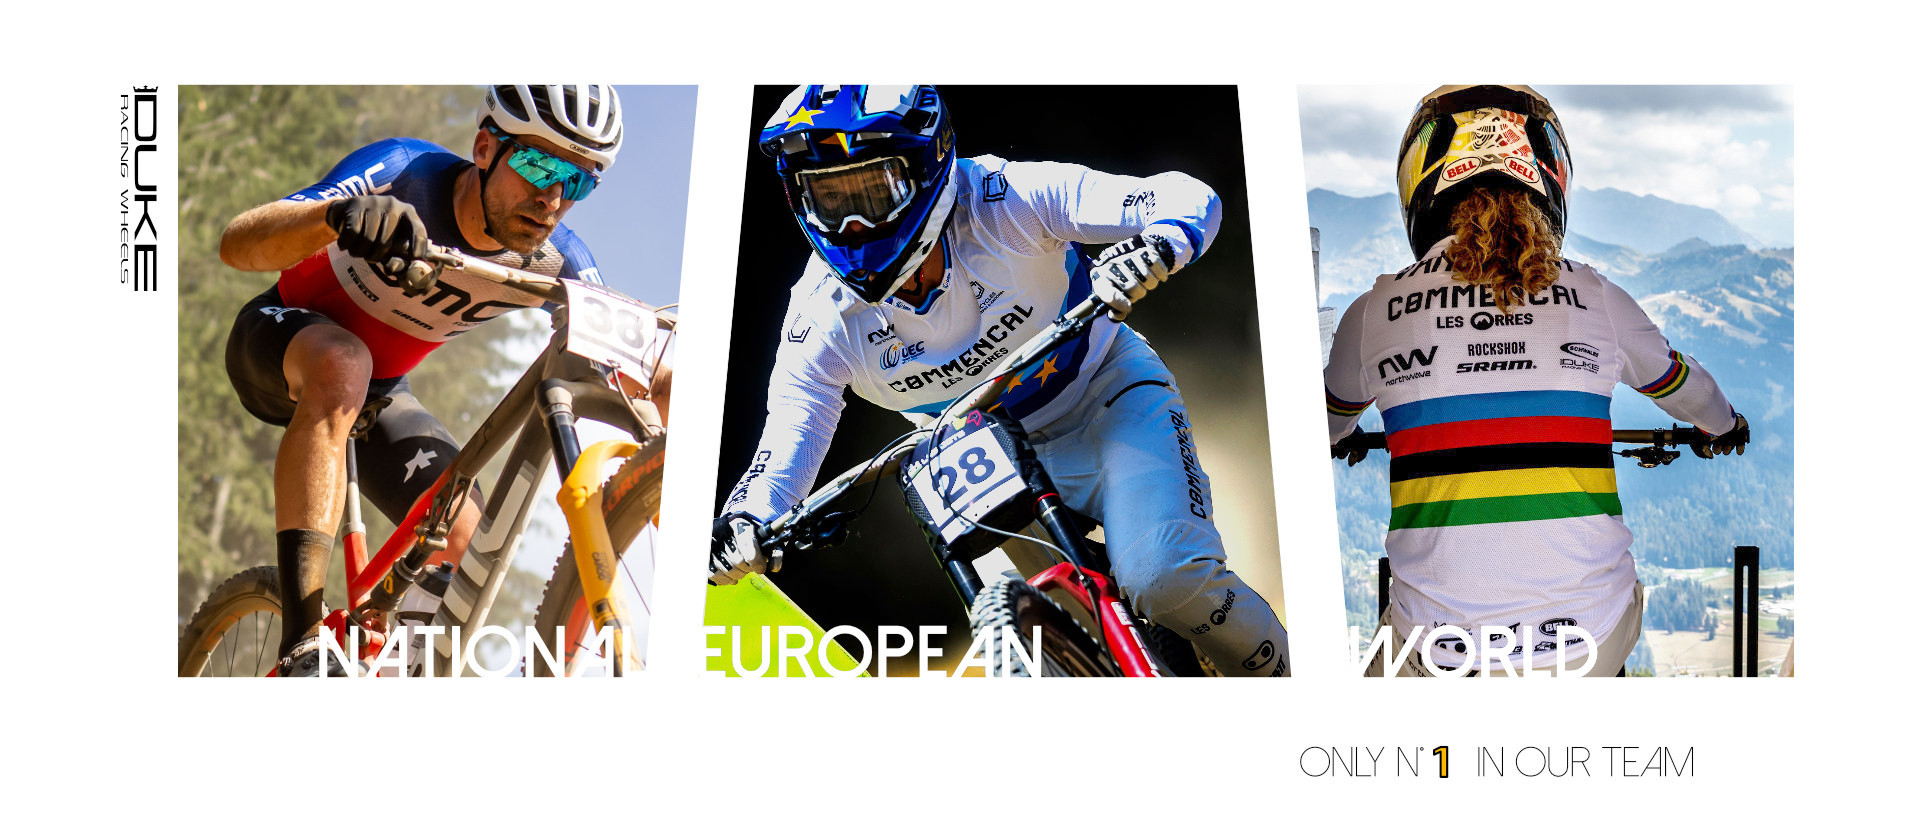 3 Champions titles: France XC, Europe DH, World